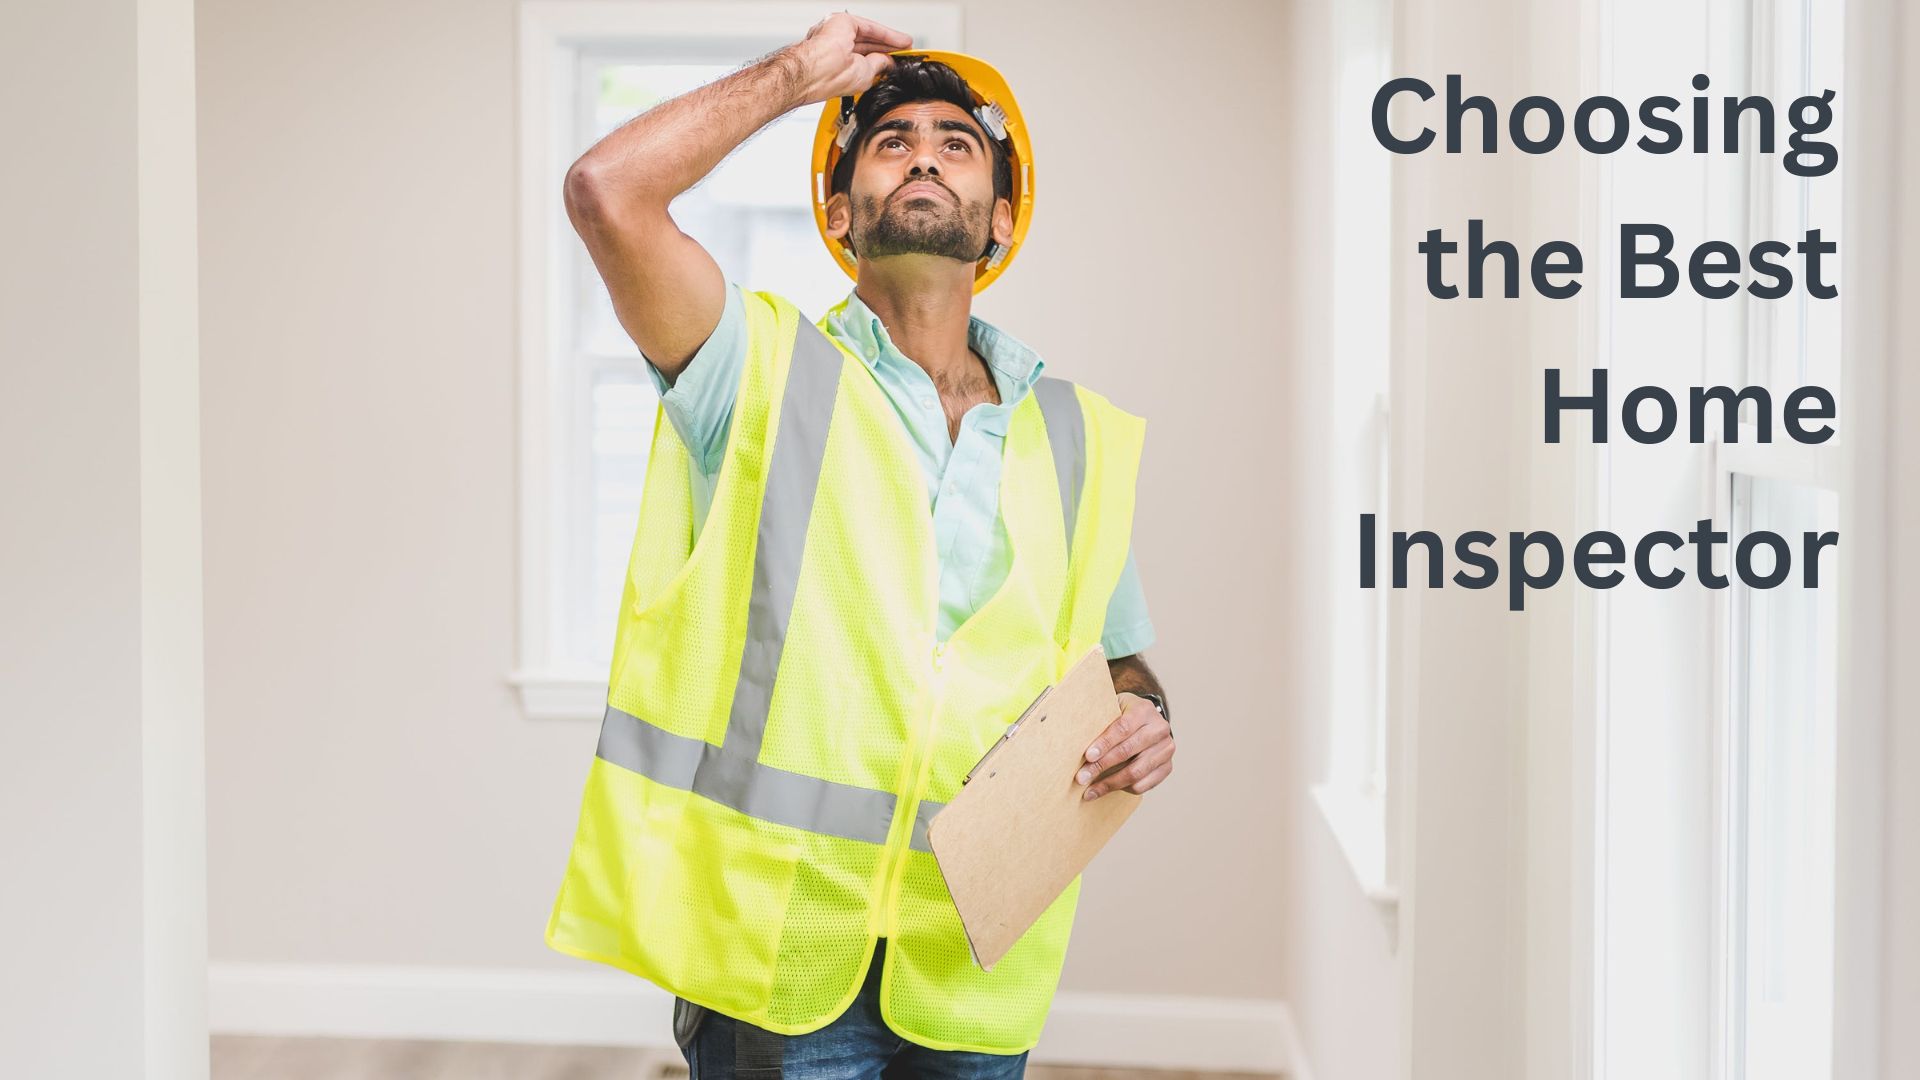 How to Find the Best Home Inspection Company in the Lowcountry